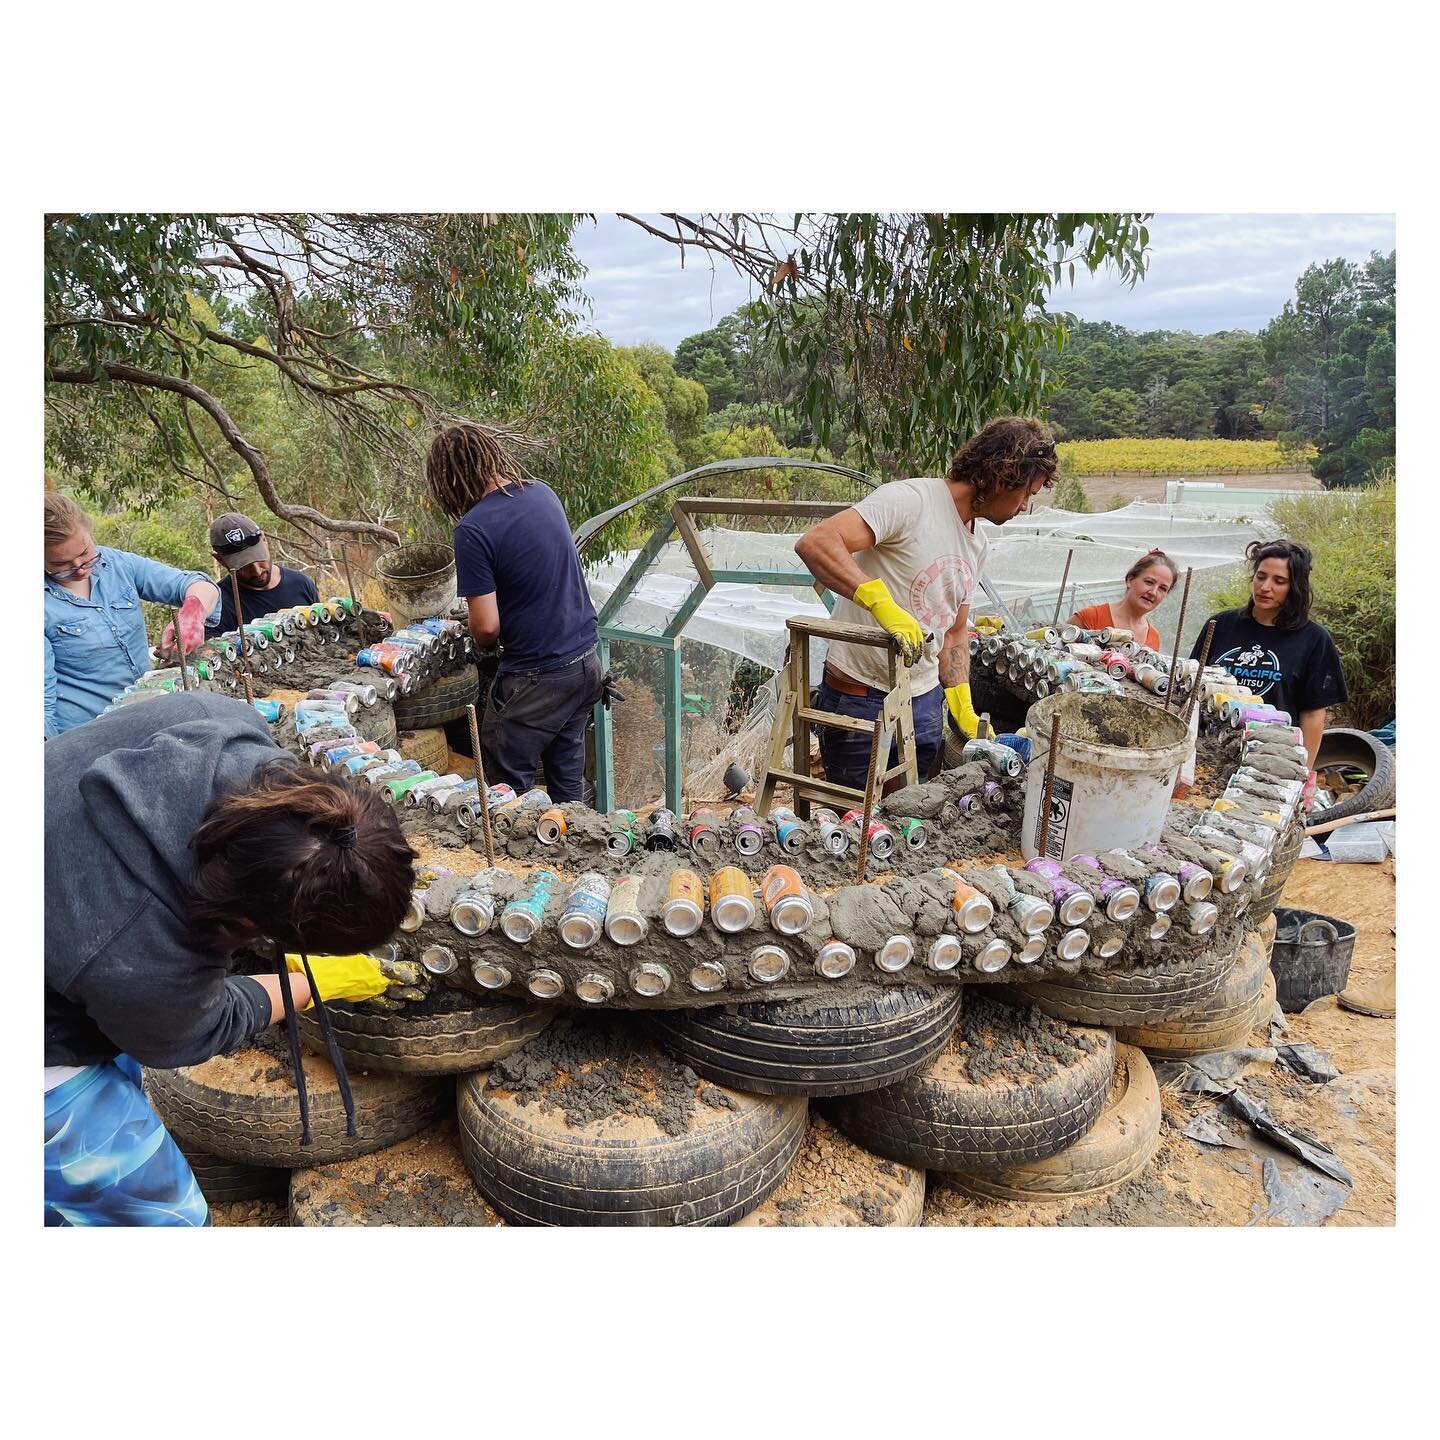 I spent Easter doing a workshop about earthships with Dr Martin Freney @earthshipecohomes and his amazing crew in the Adelaide hills. Spent everyday outdoors with a good bunch of people I hope to meet again on future projects. We got hands-on with ty